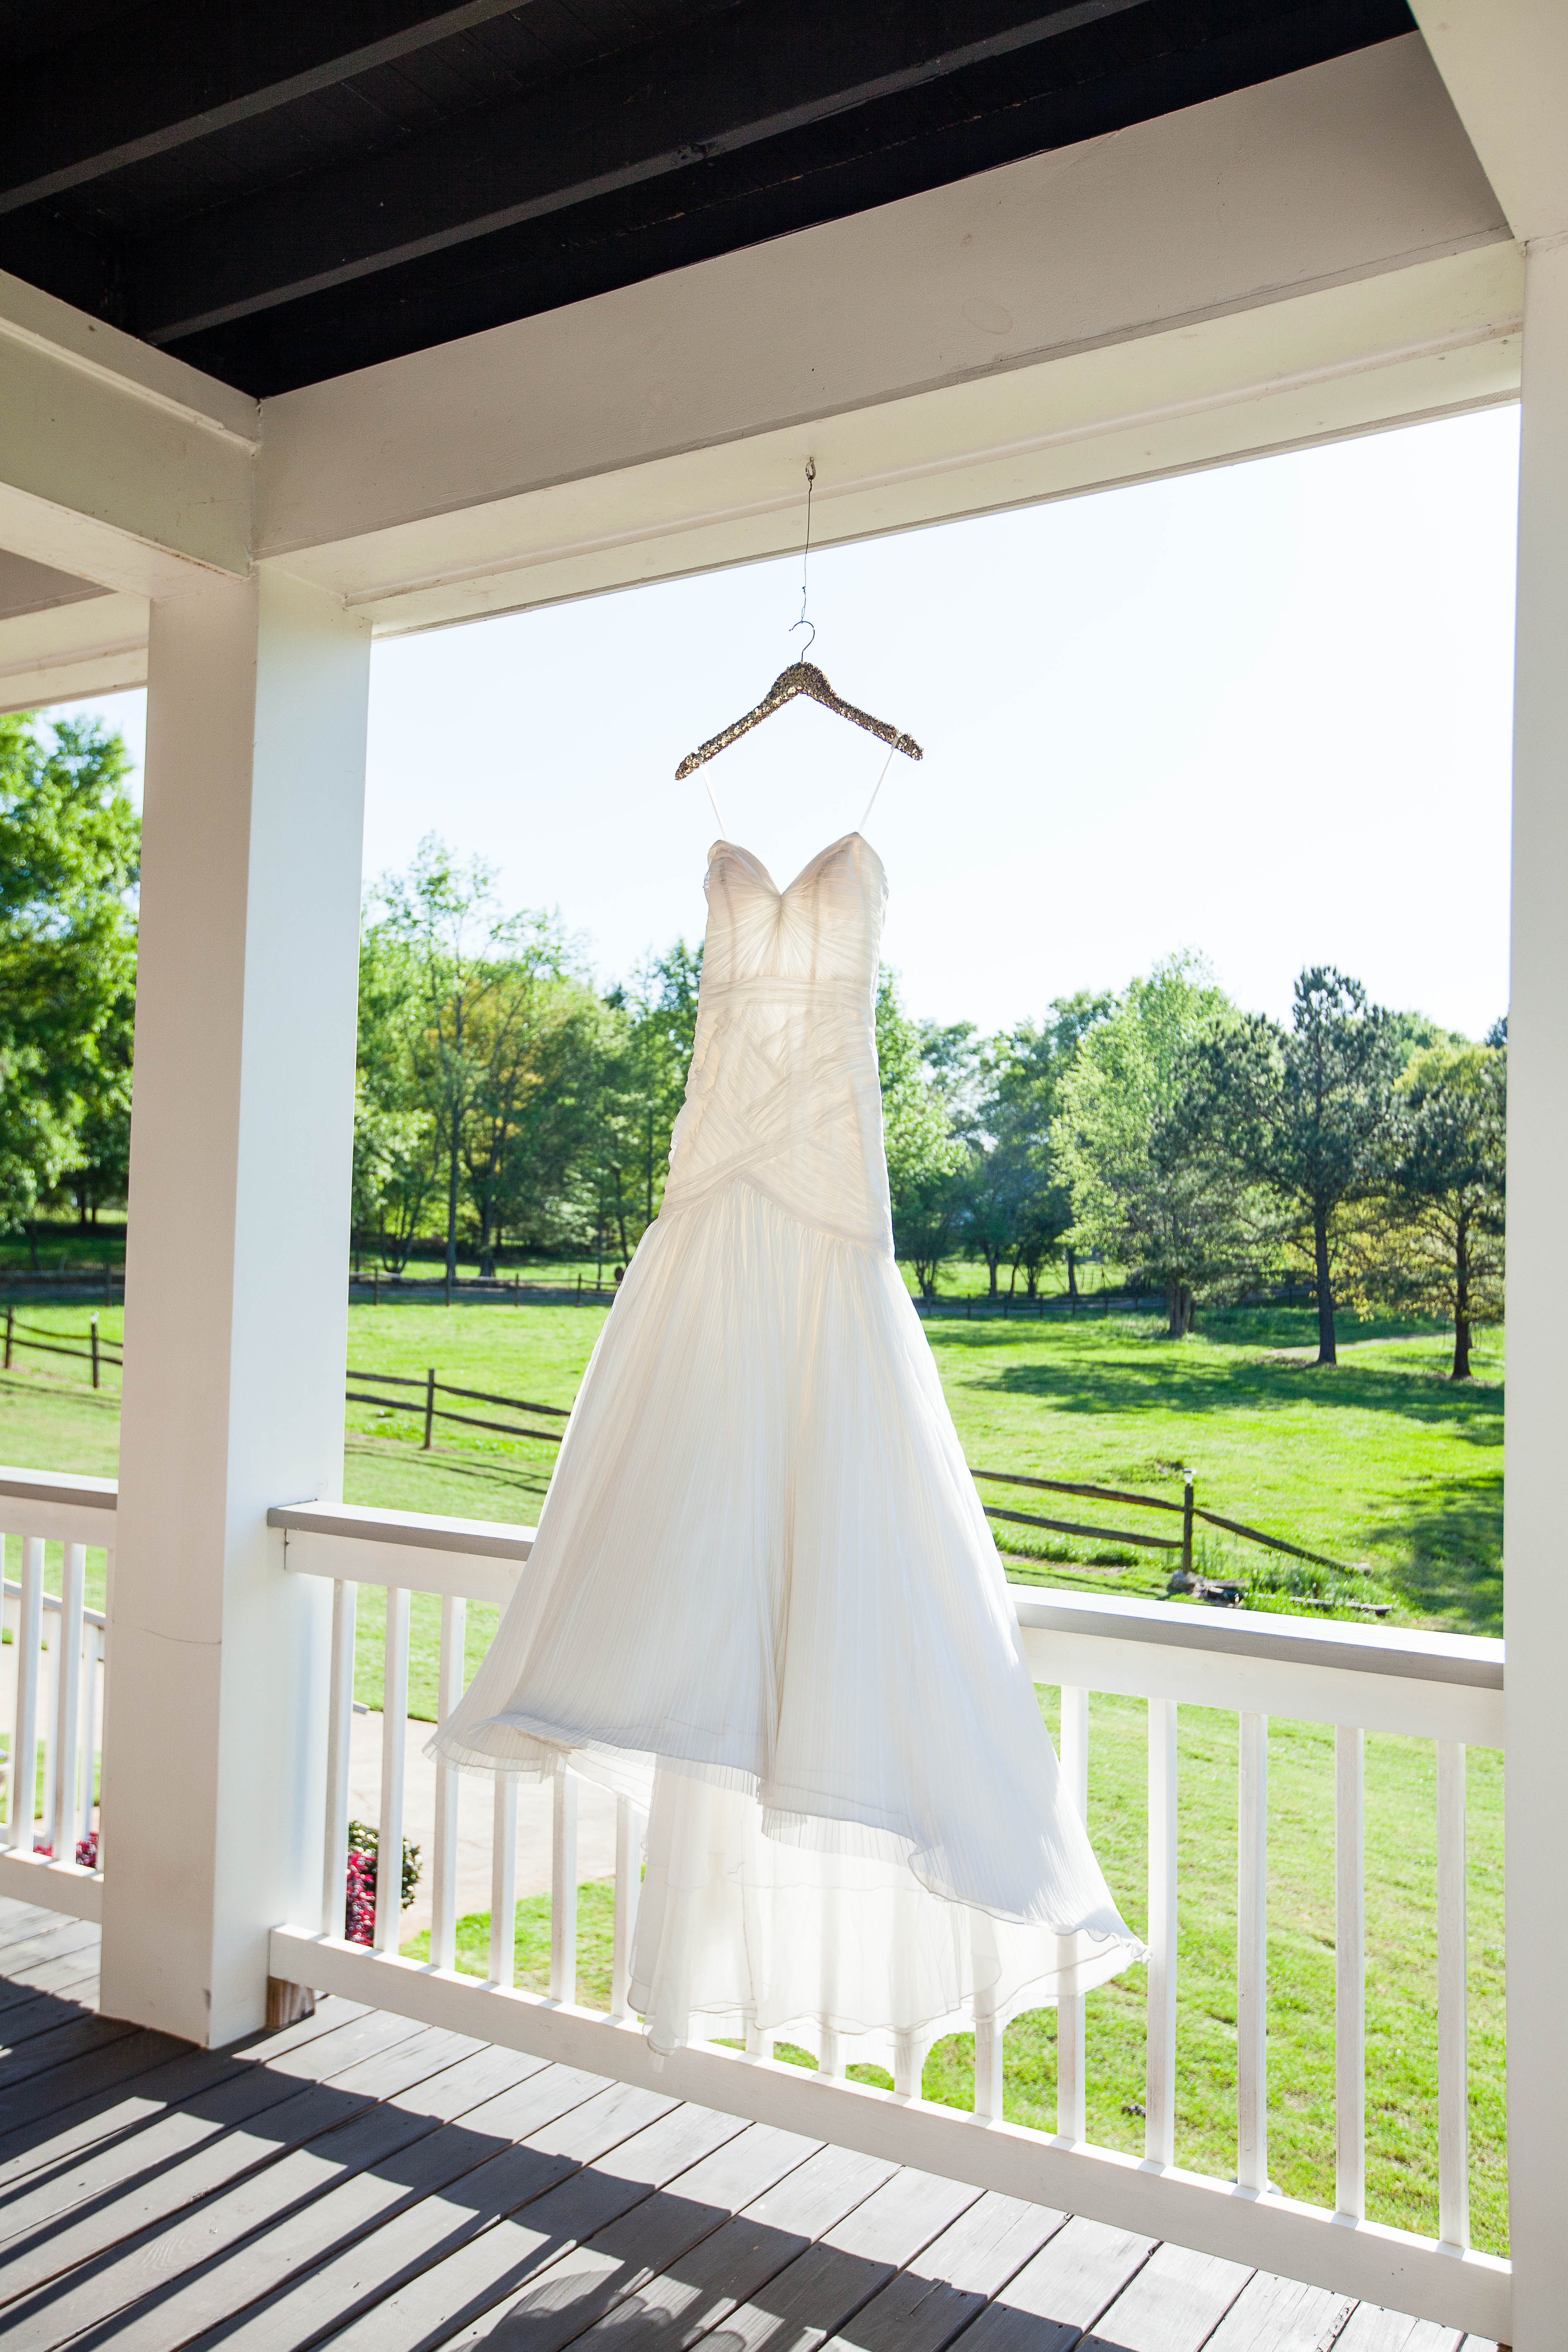 Oak Manor Barn Wedding, Newnan GA.  Photos by Chey Photography | Flowers by Kelly Hillis, The Perfect Posey